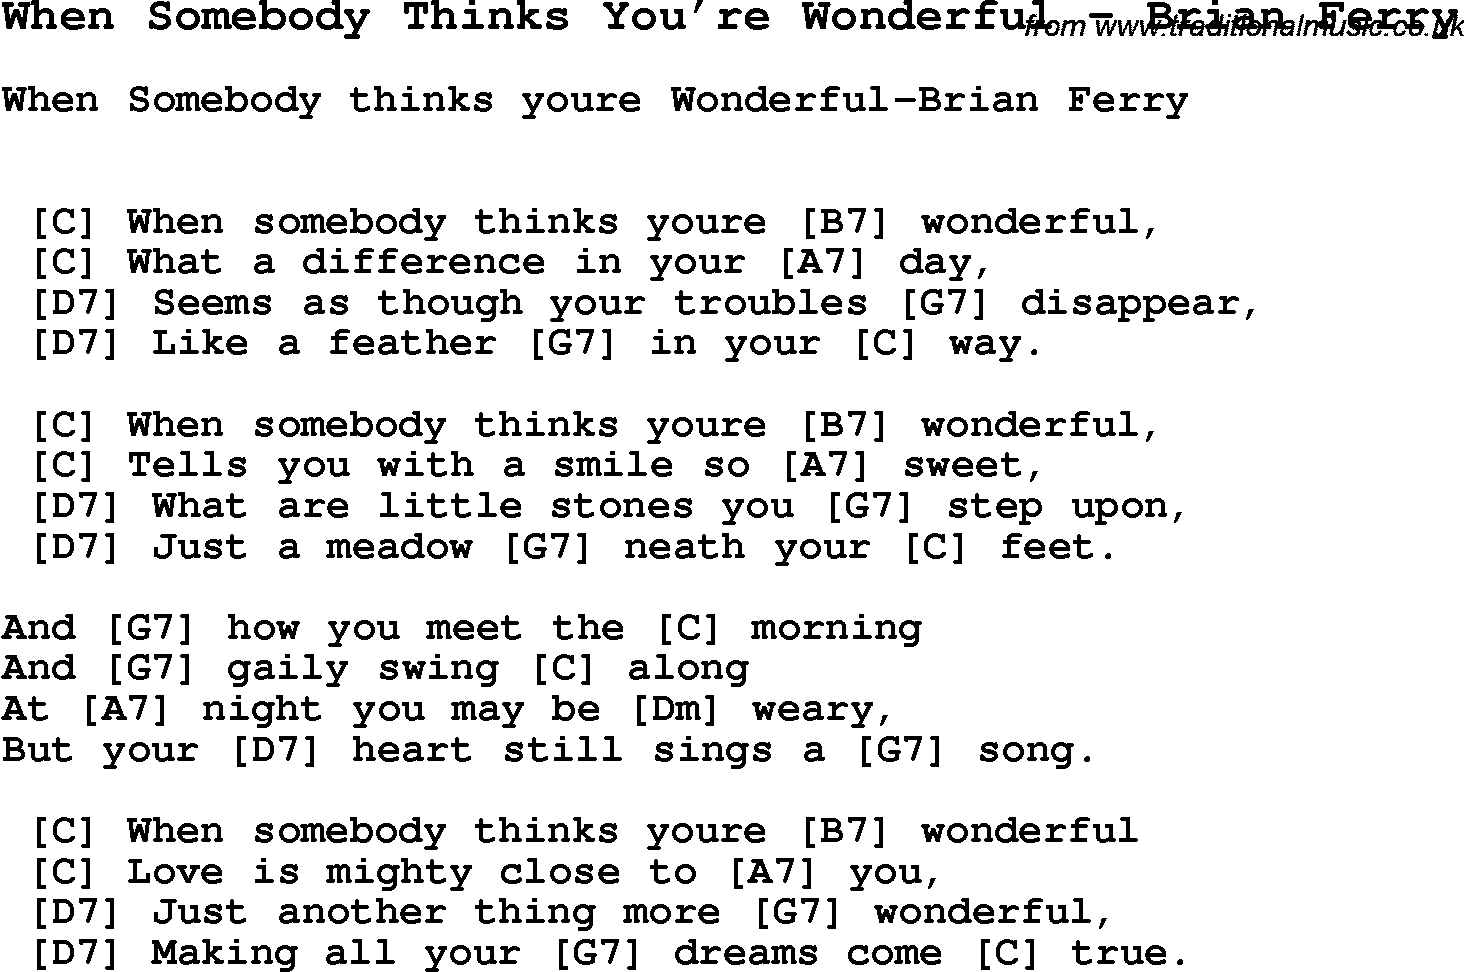 Song When Somebody Thinks You’re Wonderful by Brian Ferry, with lyrics for vocal performance and accompaniment chords for Ukulele, Guitar Banjo etc.